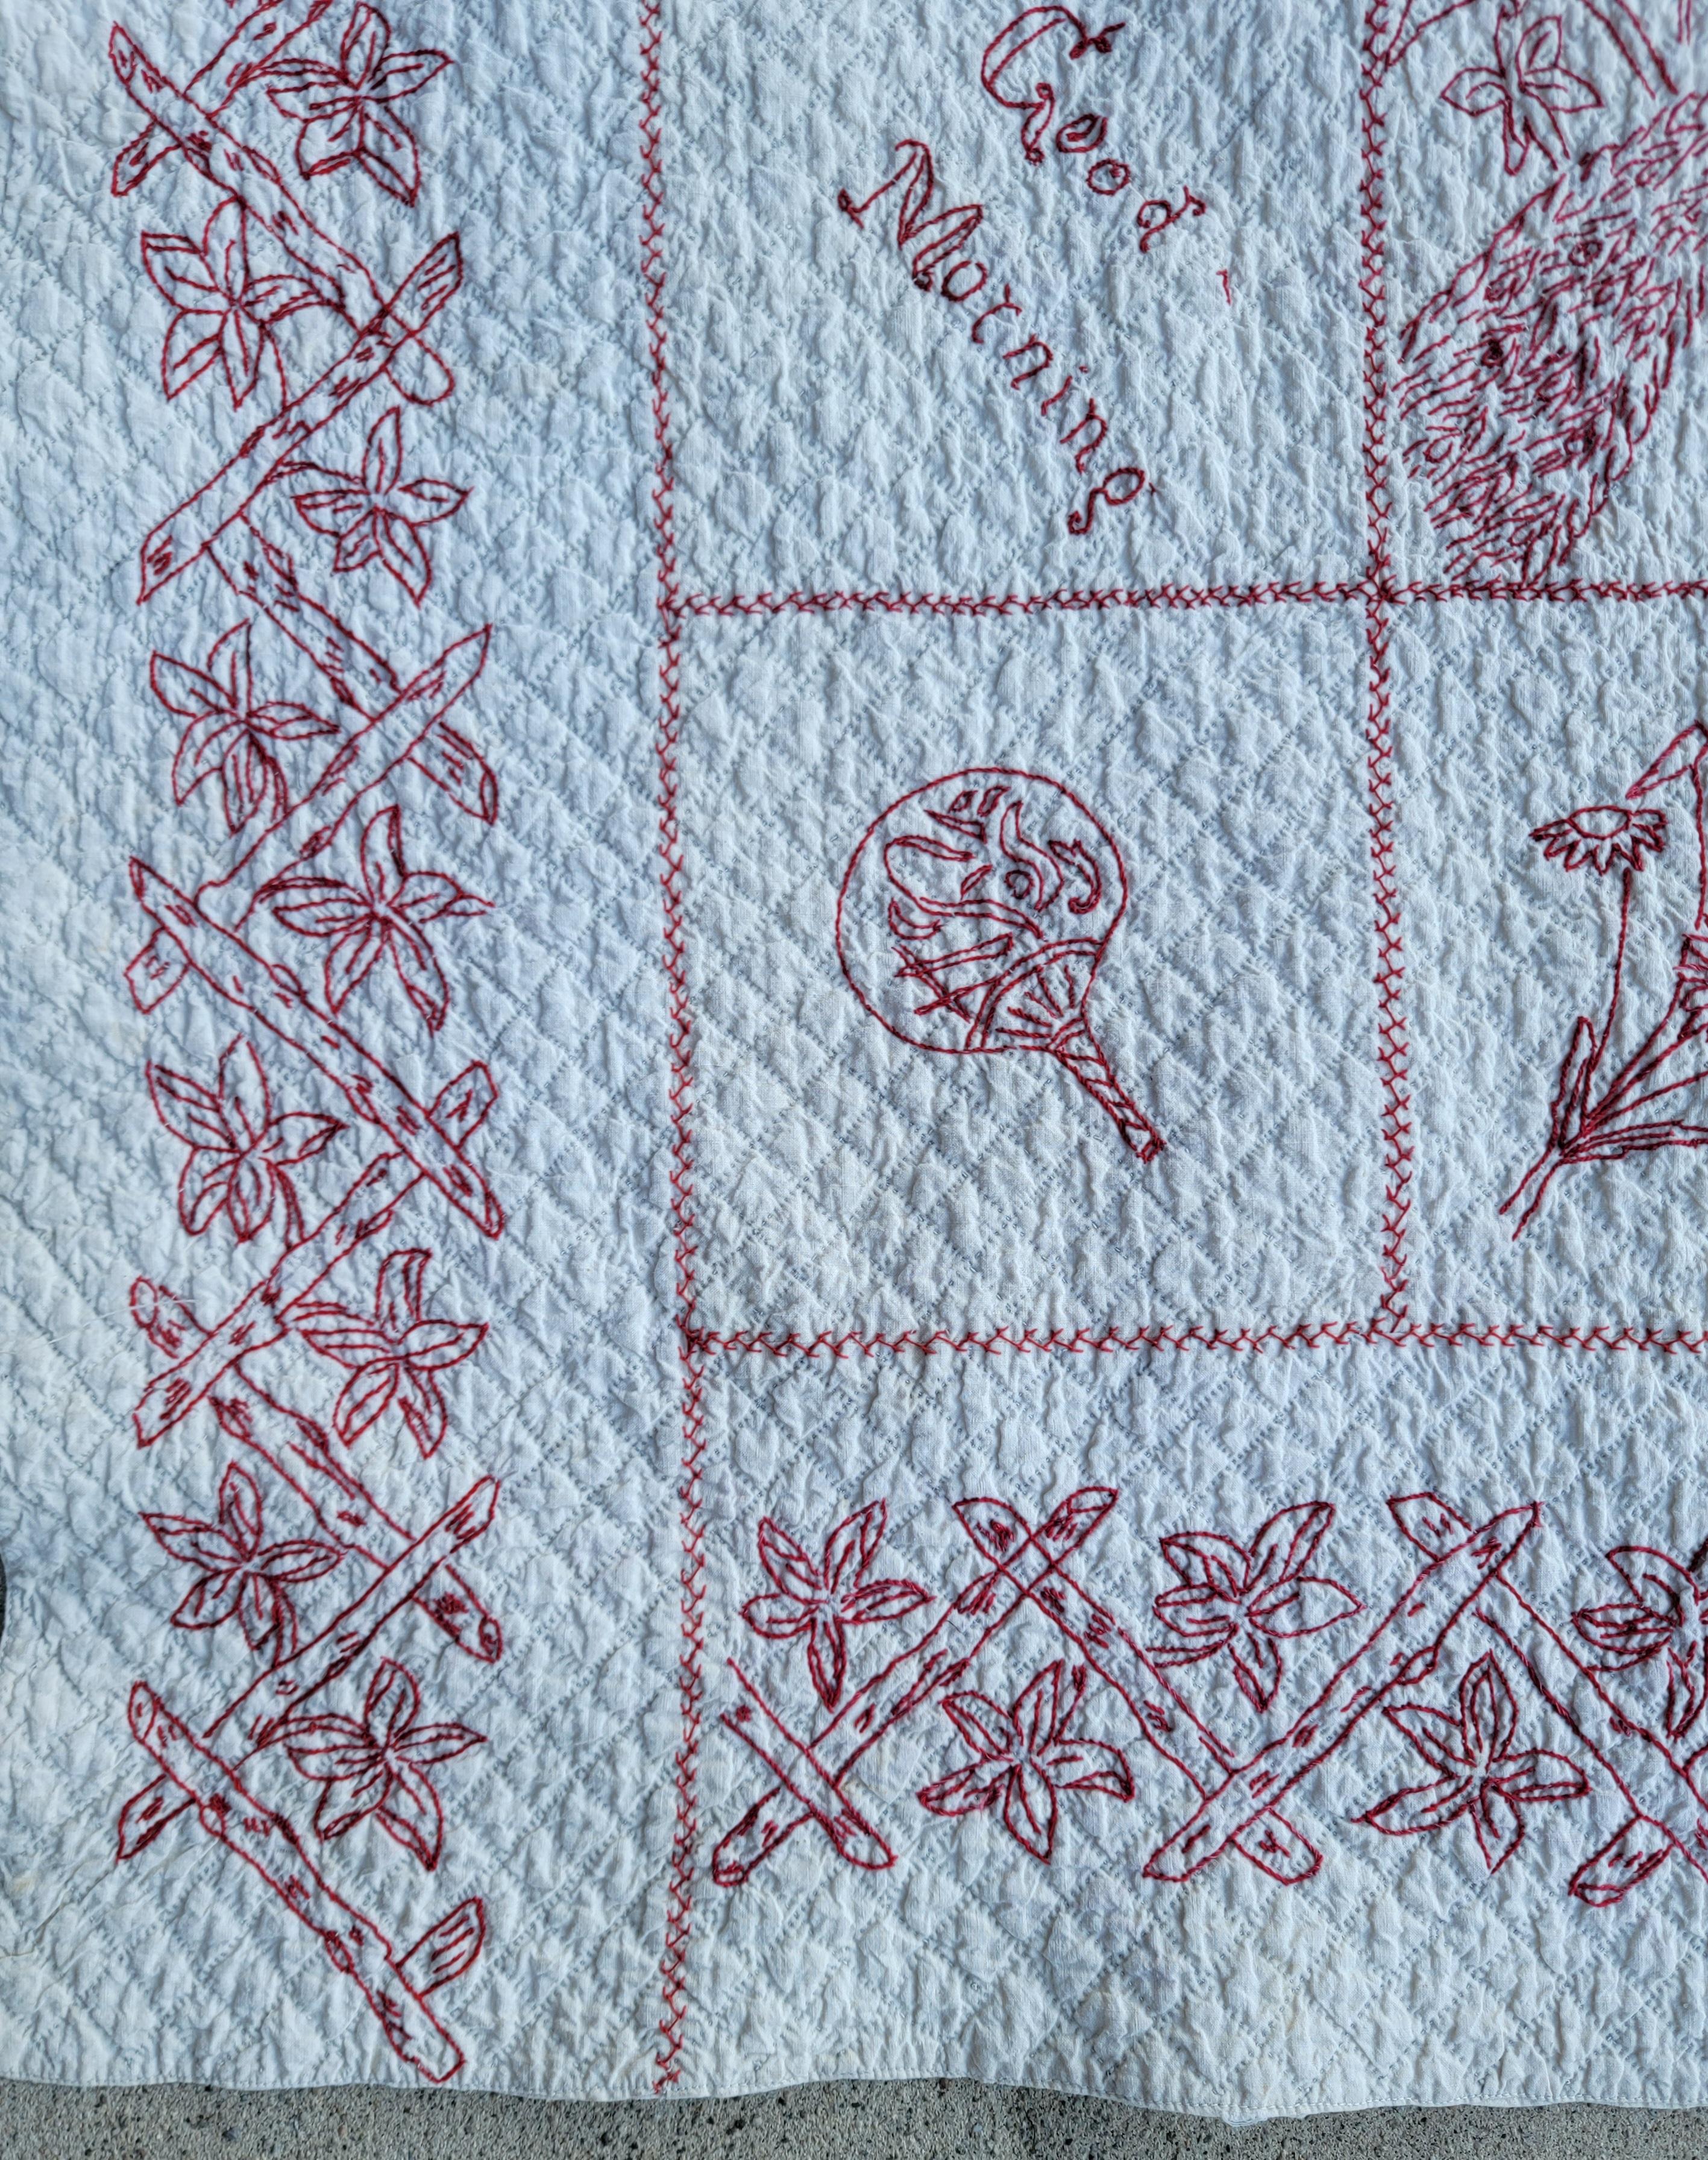 Cotton 19th C Signed & Dated 1898 Embroidered Sampler Quilt For Sale